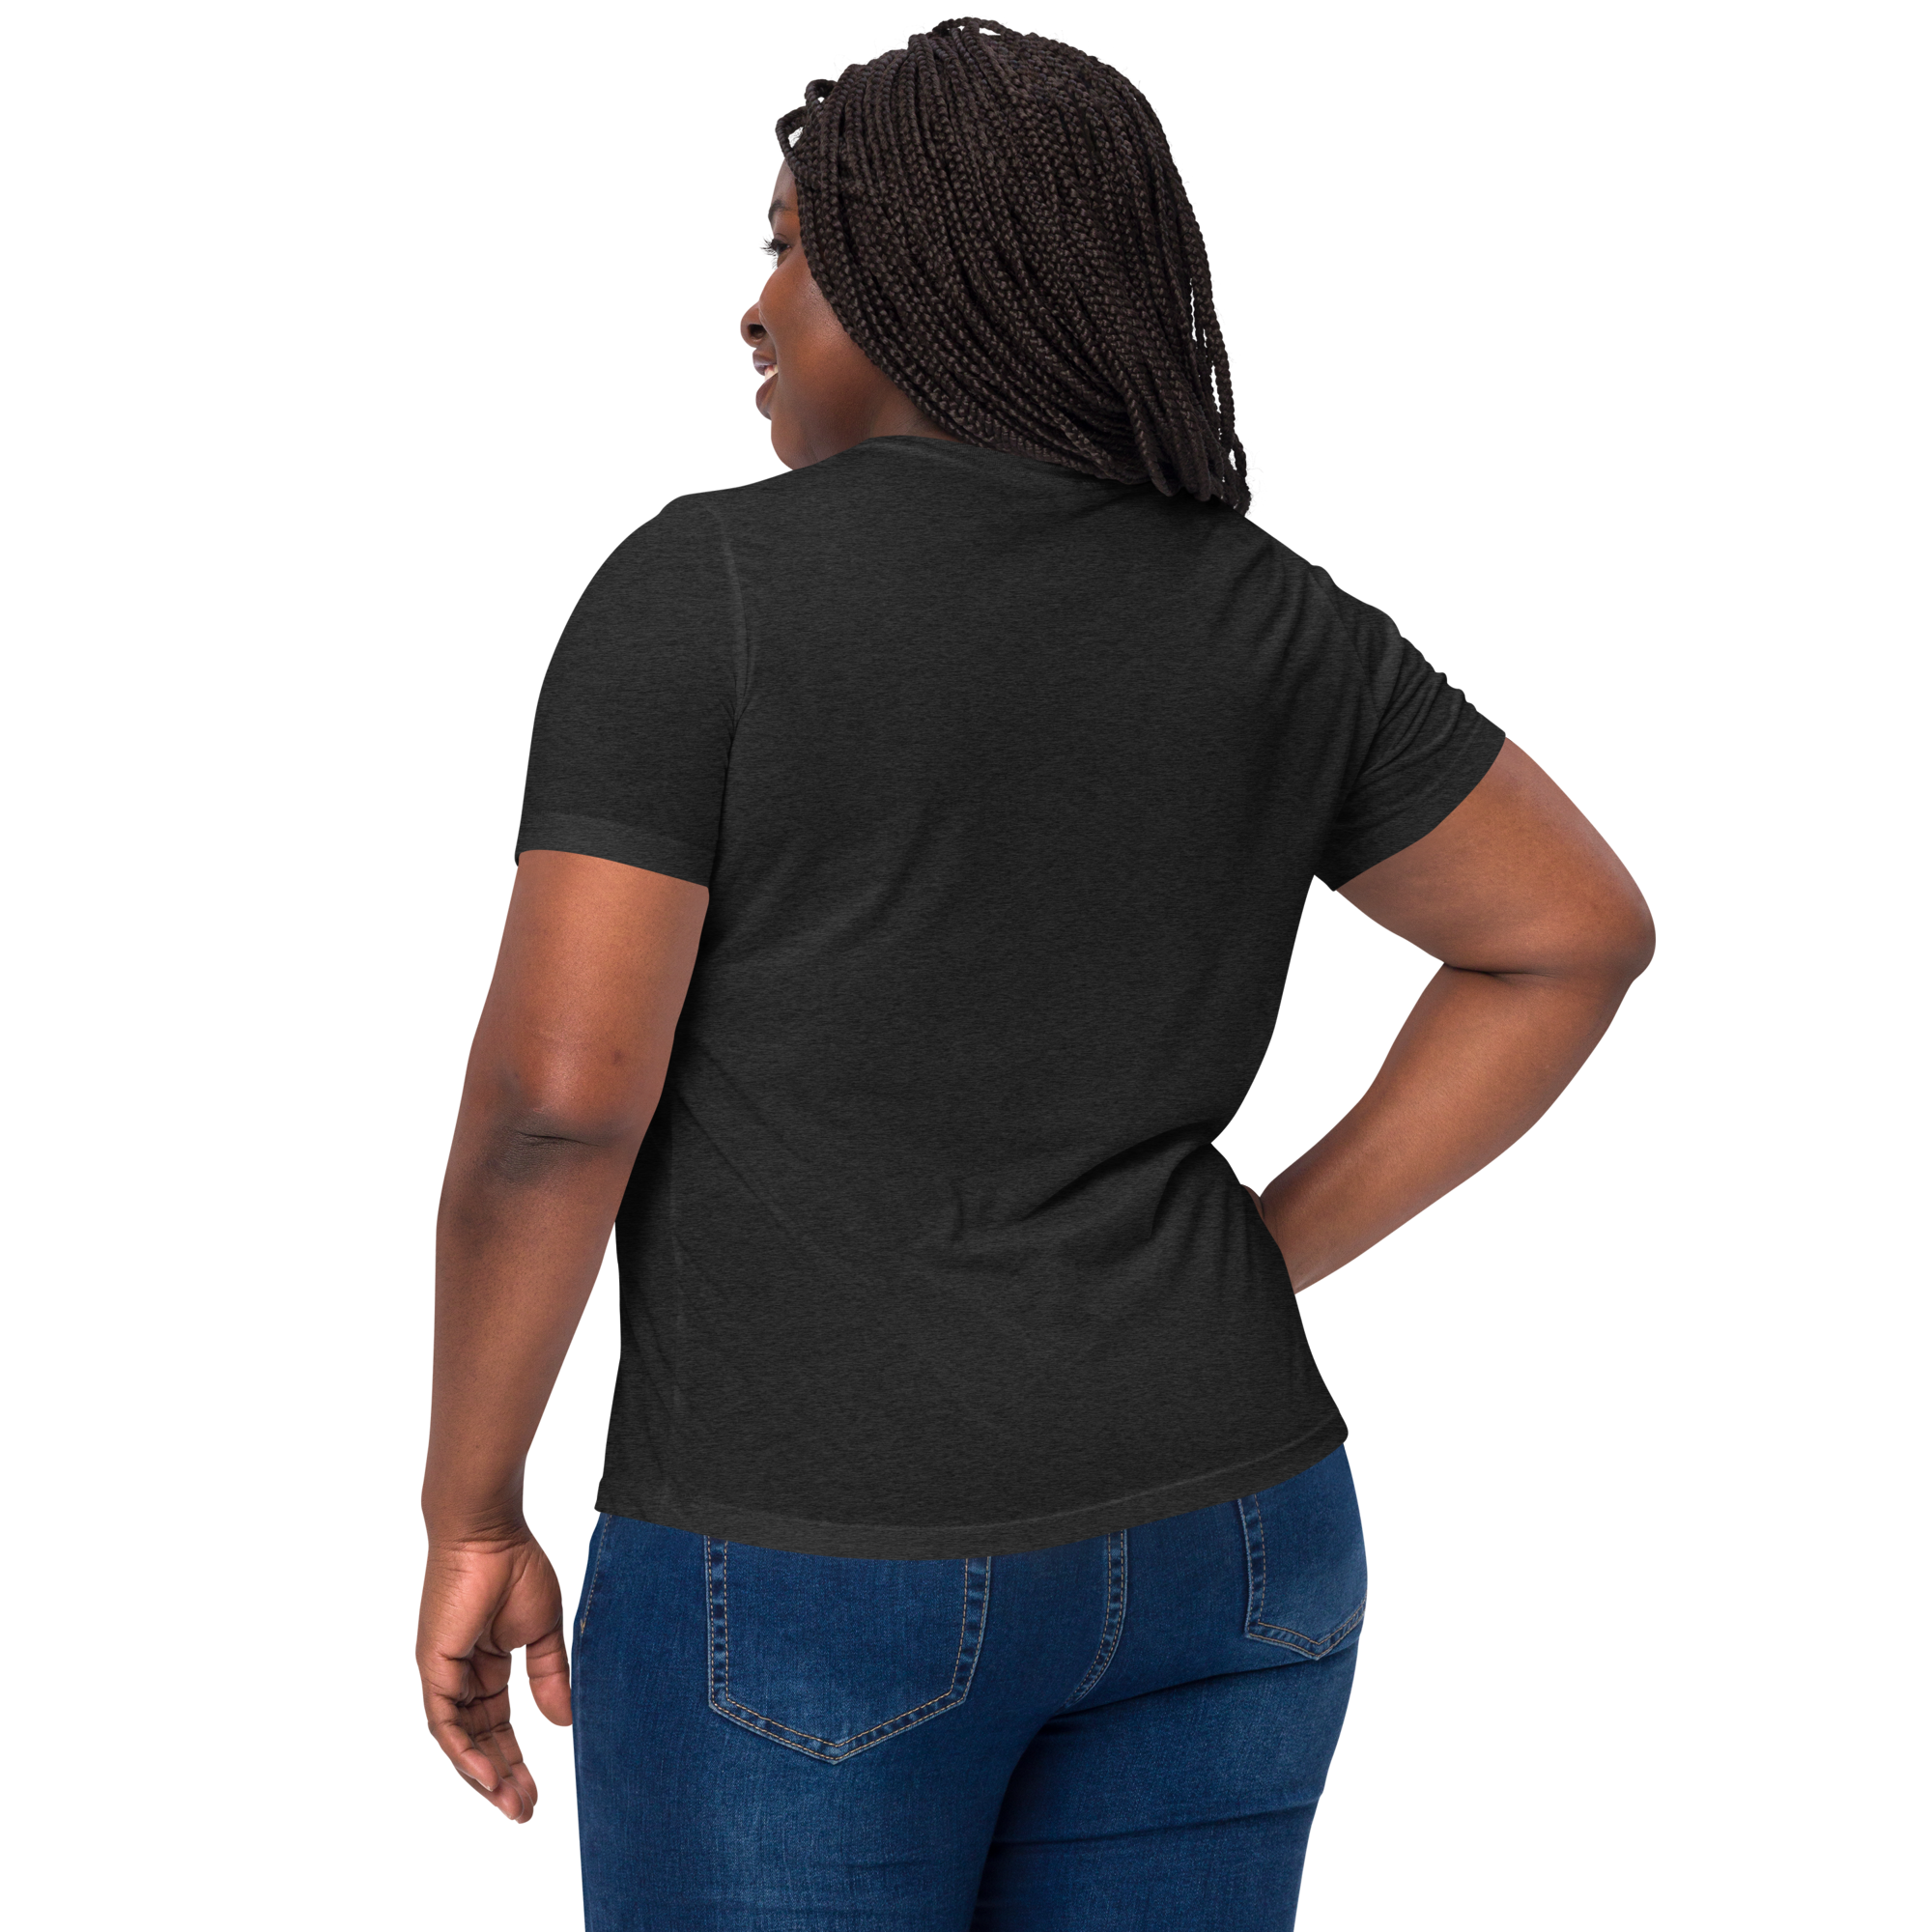 Dickson St Relaxed Fit Tri-Blend Women&